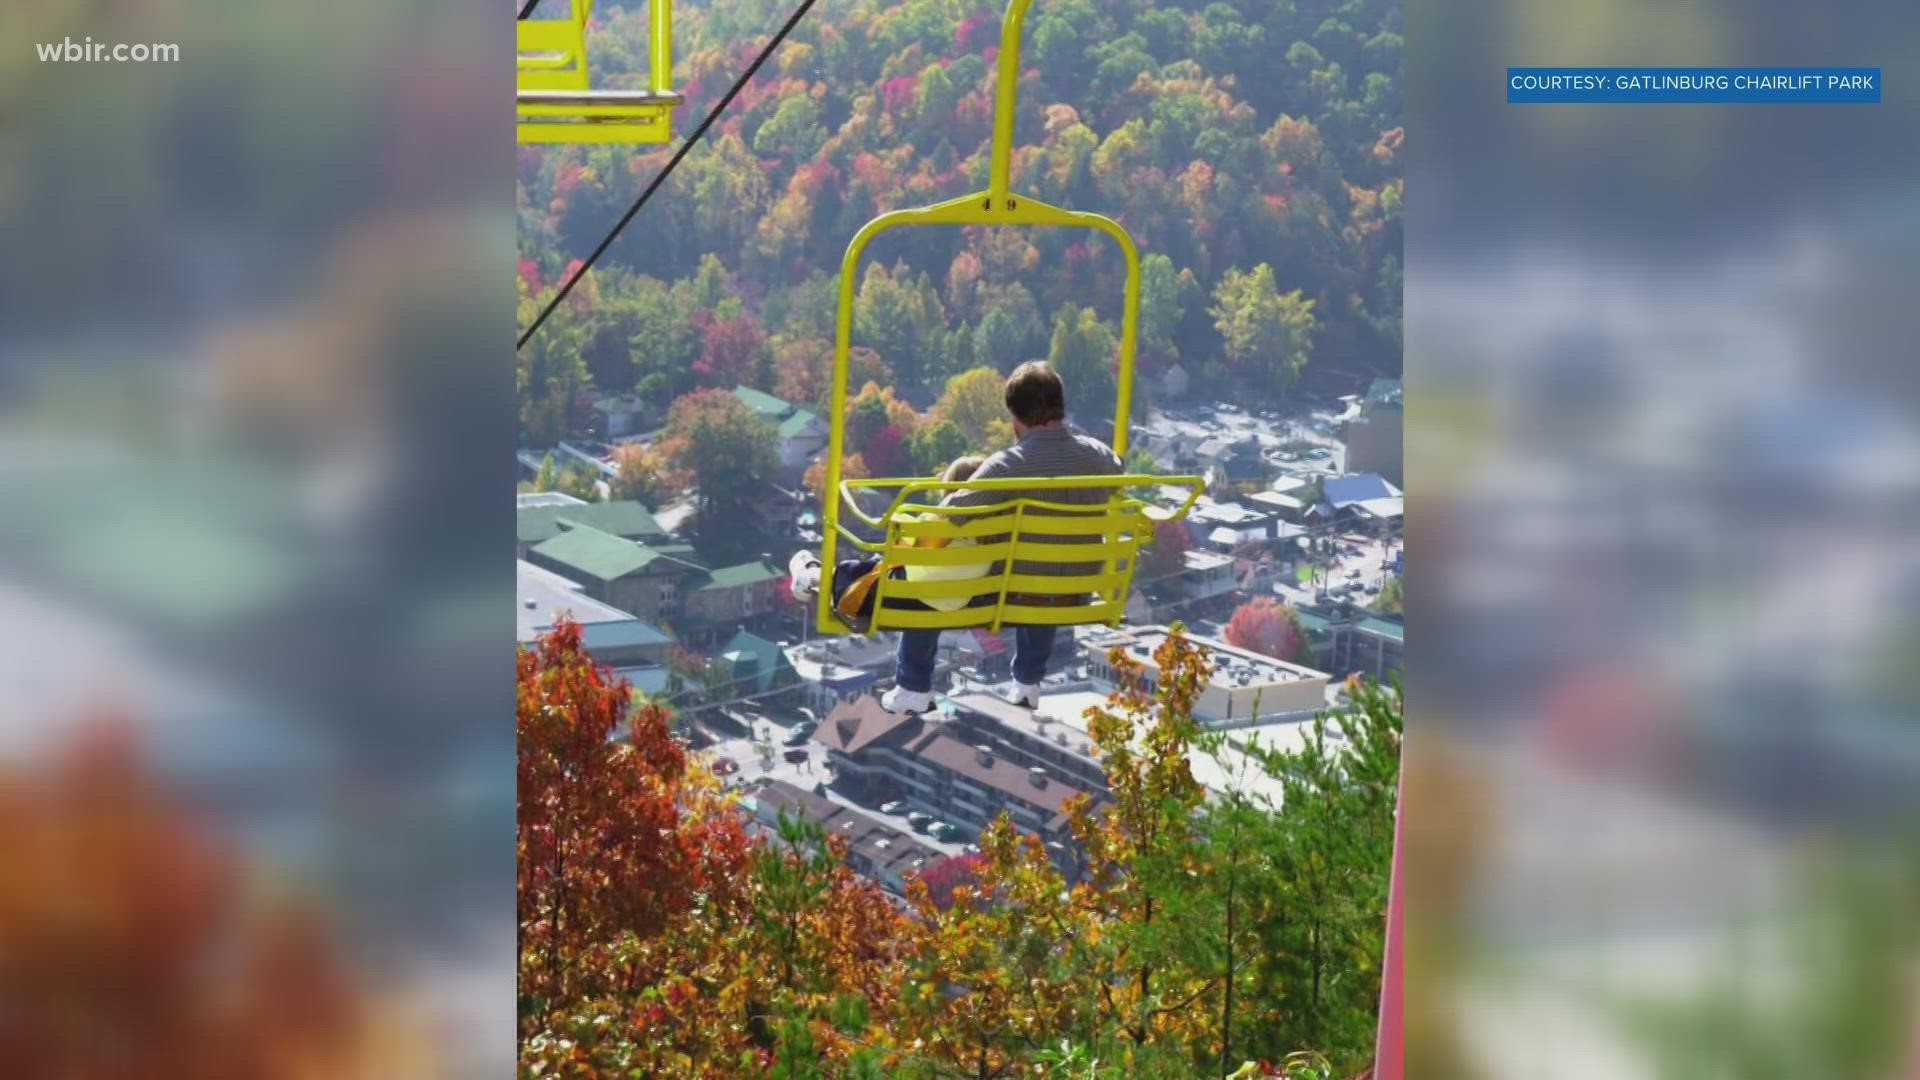 The Gatlinburg SkyLift Park said they were auctioning off 11 chairs that survived the 2016 wildfires. Money will go to help people affected by the tornadoes.